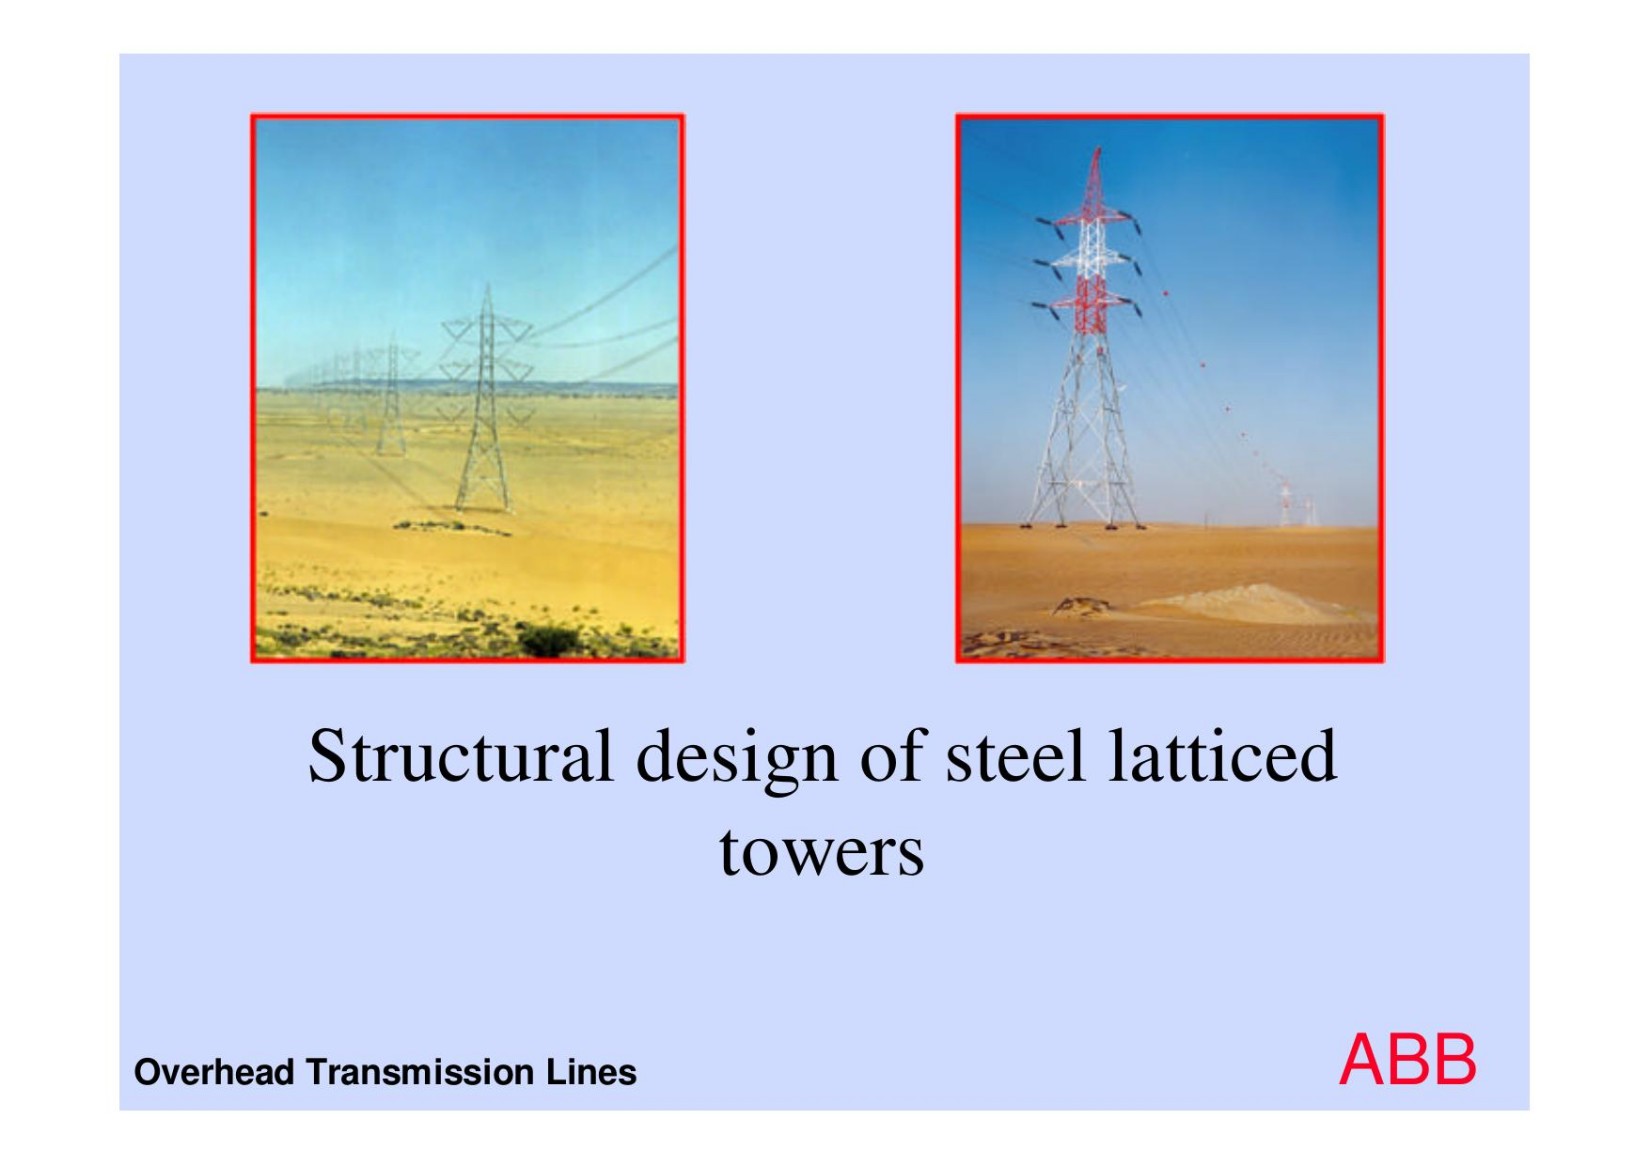 Structural design of steel latticed towers